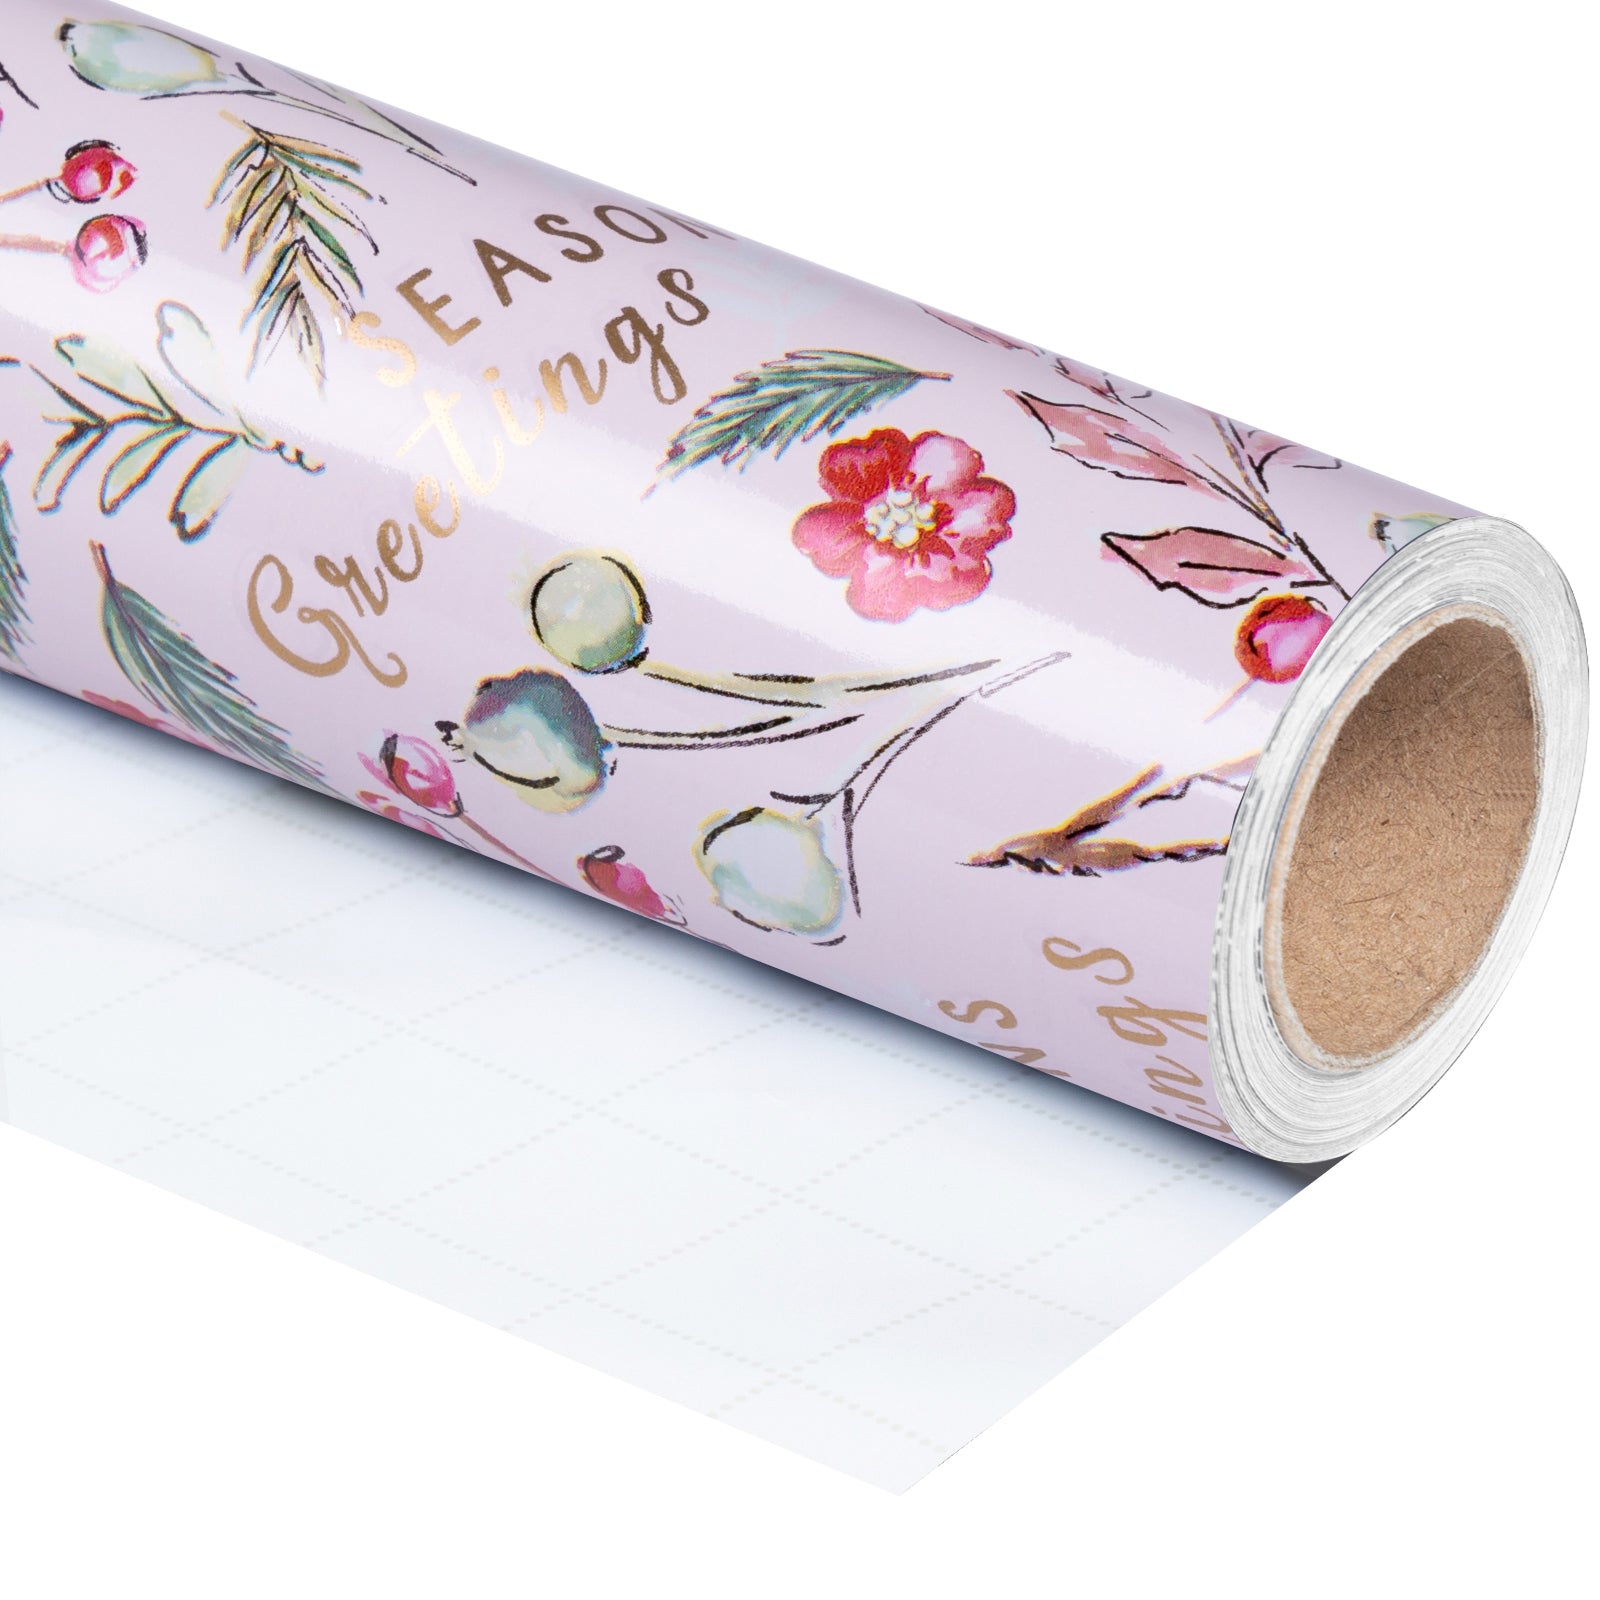 Warm St one Seas on's Greeting Foil Wrapping Paper Roll Wholesale Wrapholic